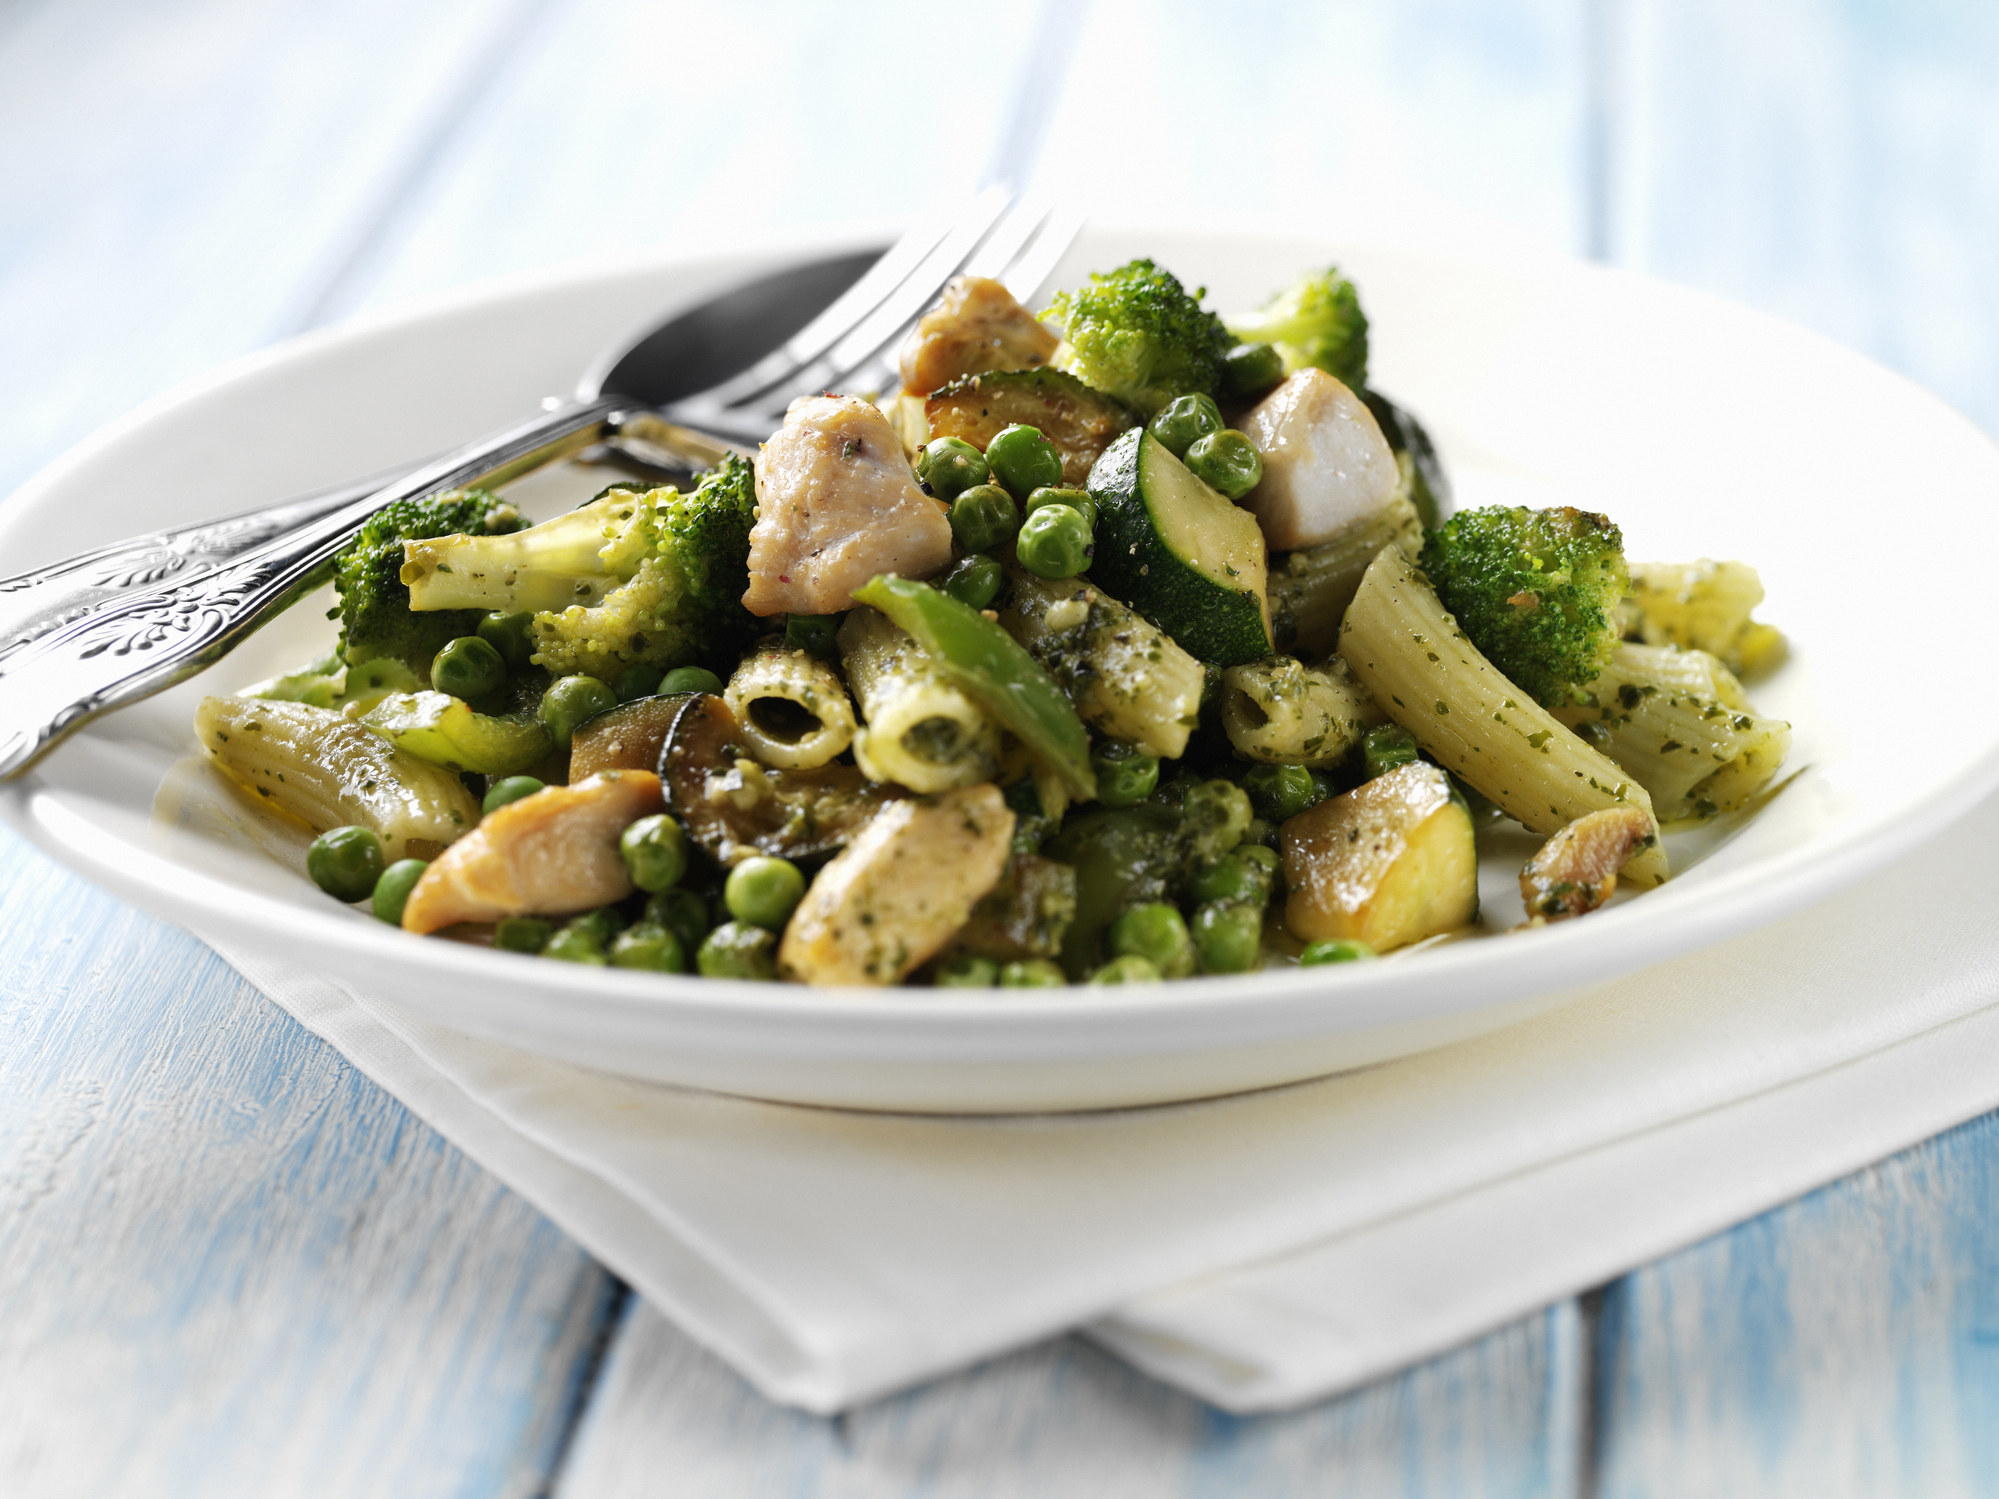 Pasta with peas and broccoli